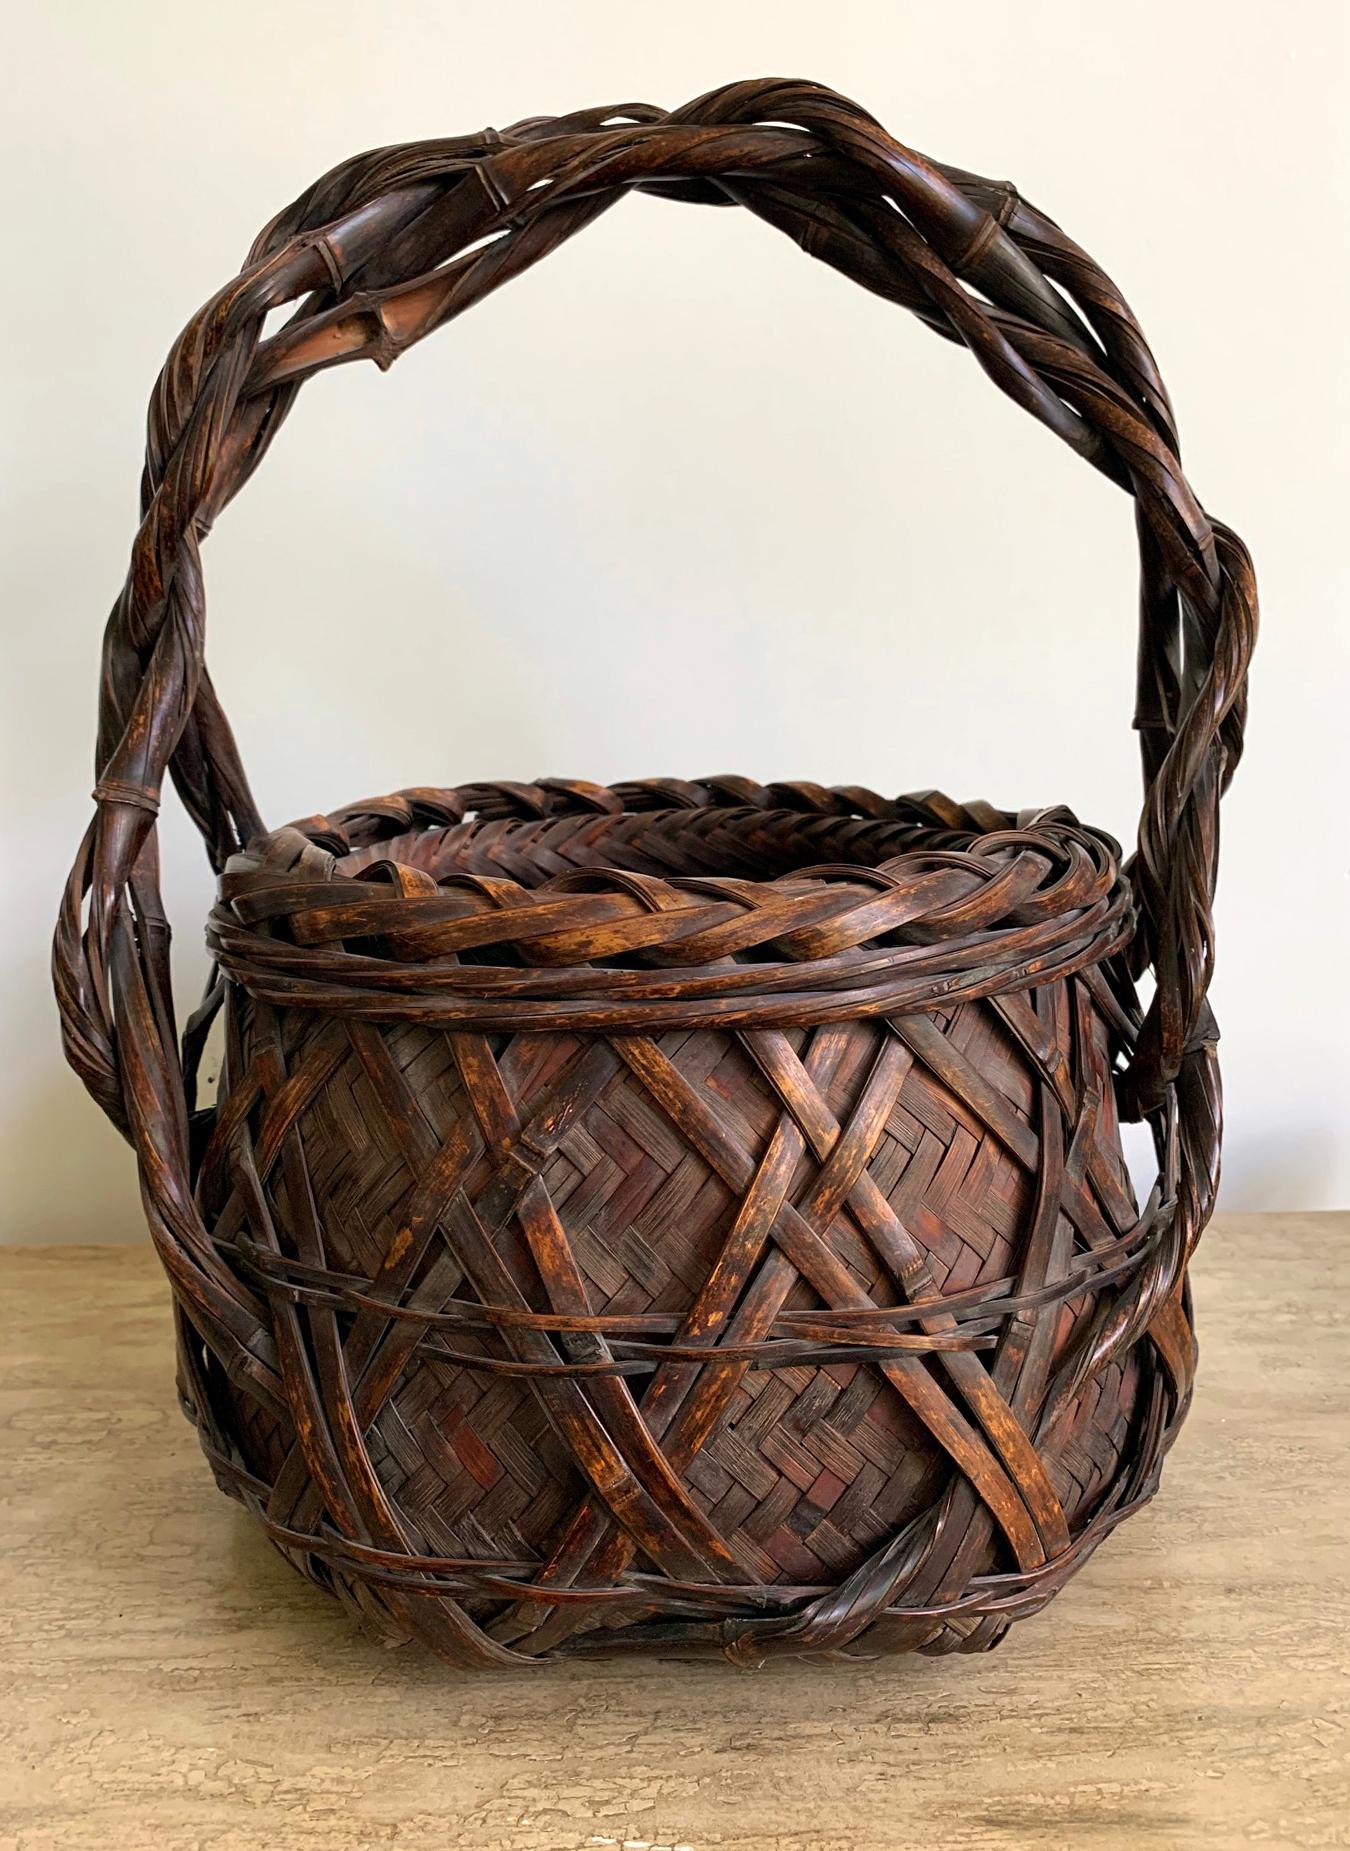 Bold, rustic and with an earthy free spirit, this wagumi style flower basket with twisted handle (ikebana) was designed and woven to evoke a sense of serenity and humbleness during the tea ceremony. With a large and solid barrel shape that evokes a